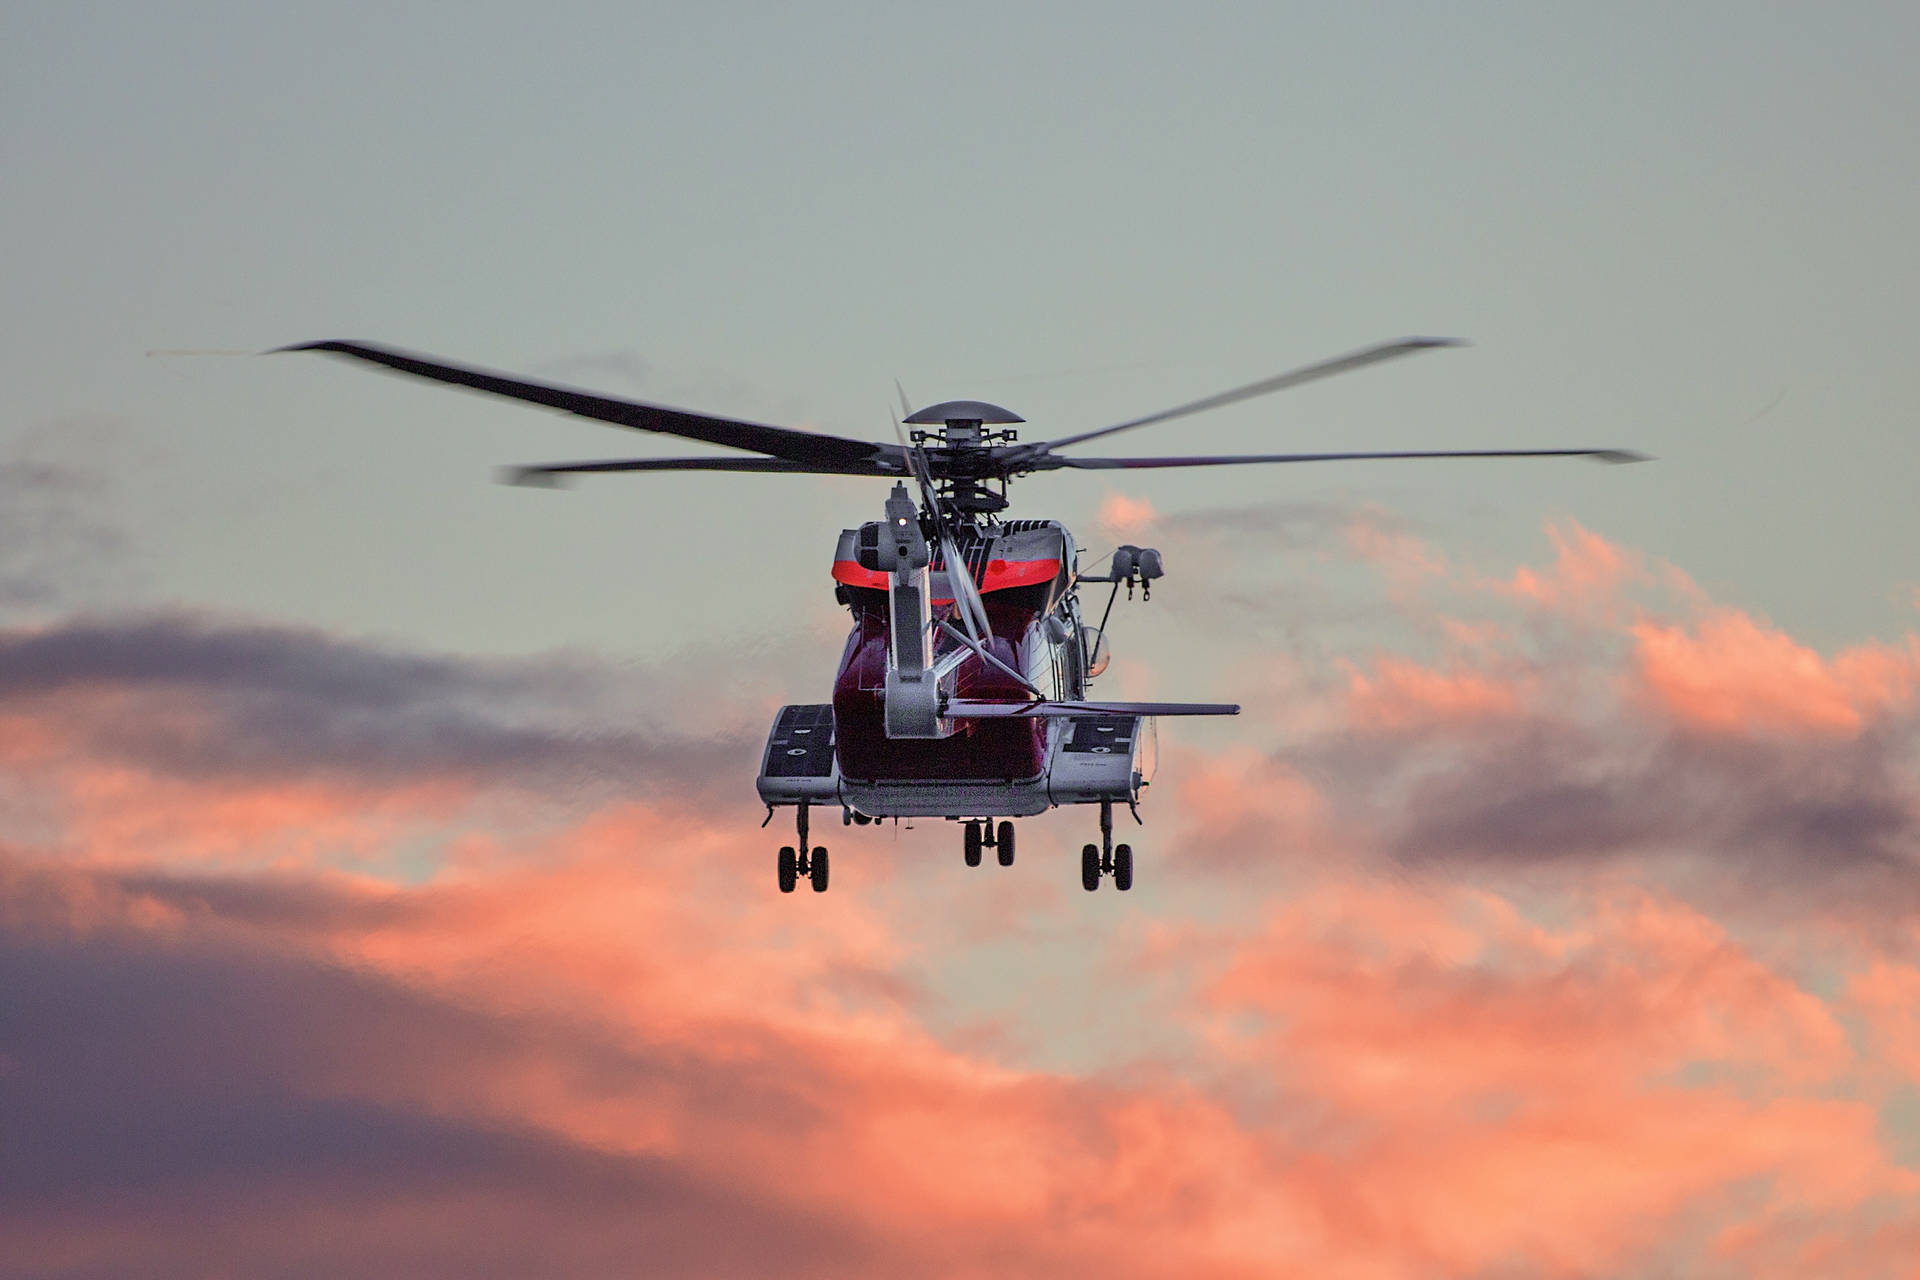 Sunset Clouds And Helicopter 4k Background